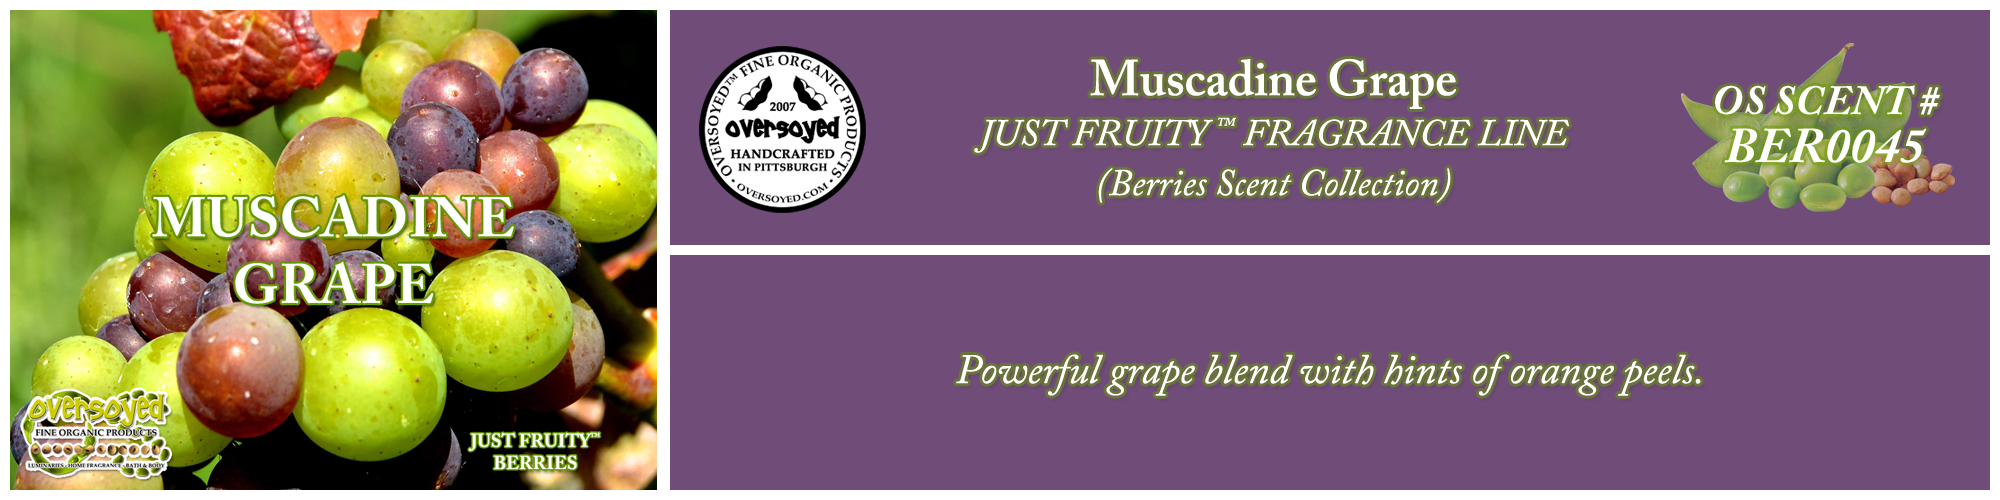 Muscadine Grape Handcrafted Products Collection